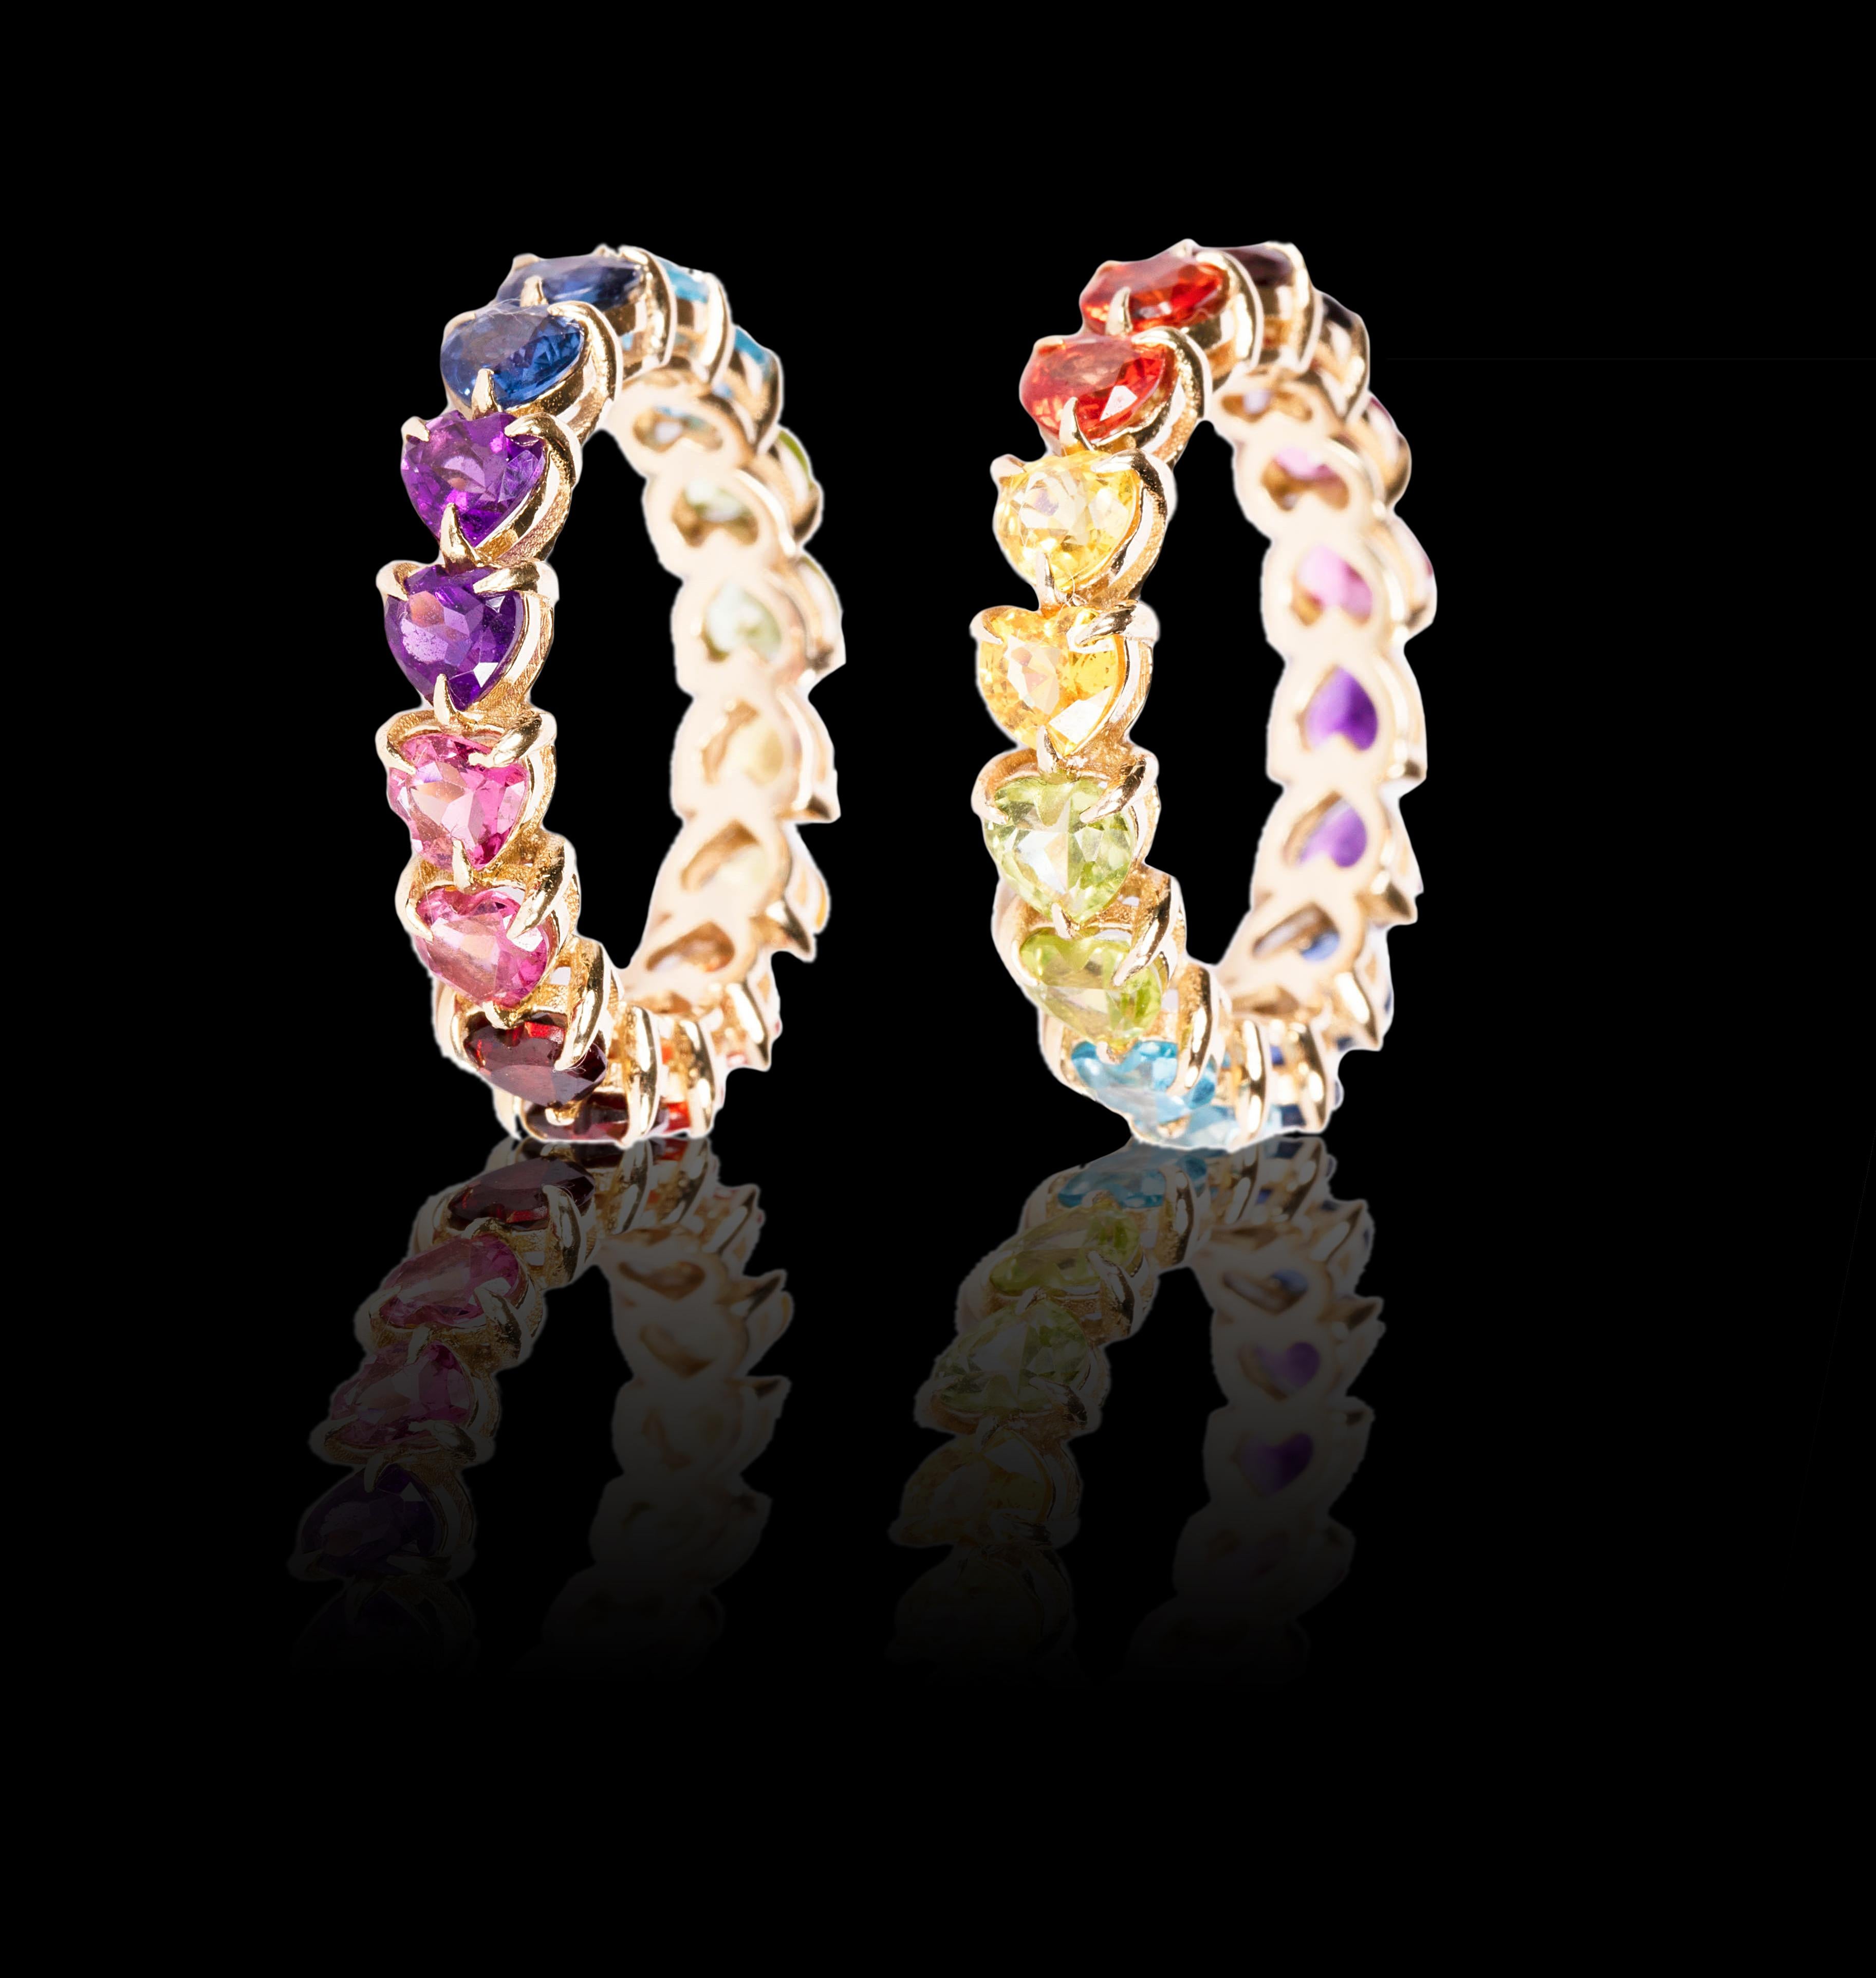 As the first fine jewelry piece from the house of Mordekai, we are celebrating one of our iconic themes, the Rainbow! This unique ring is made of 14k gold, and hand-set with the finest hand-selected, colored gems sourced from all over the world.